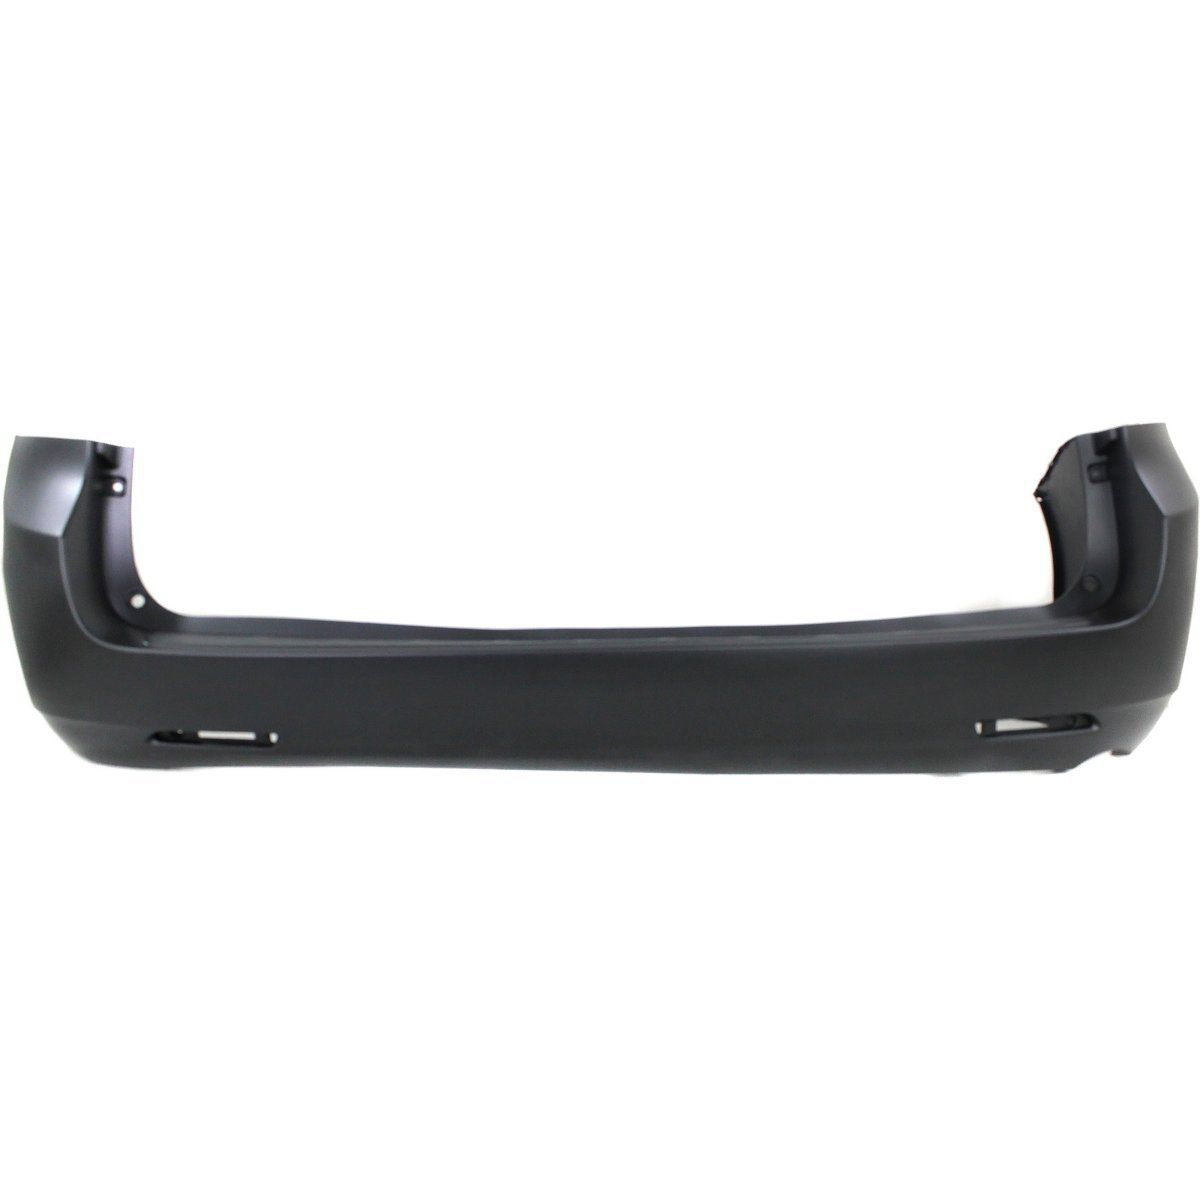 2011-2020 TOYOTA SIENNA Rear Bumper Cover BASE|LE|XLE|LIMITED  w/o Park Assist Sensors Painted to Match